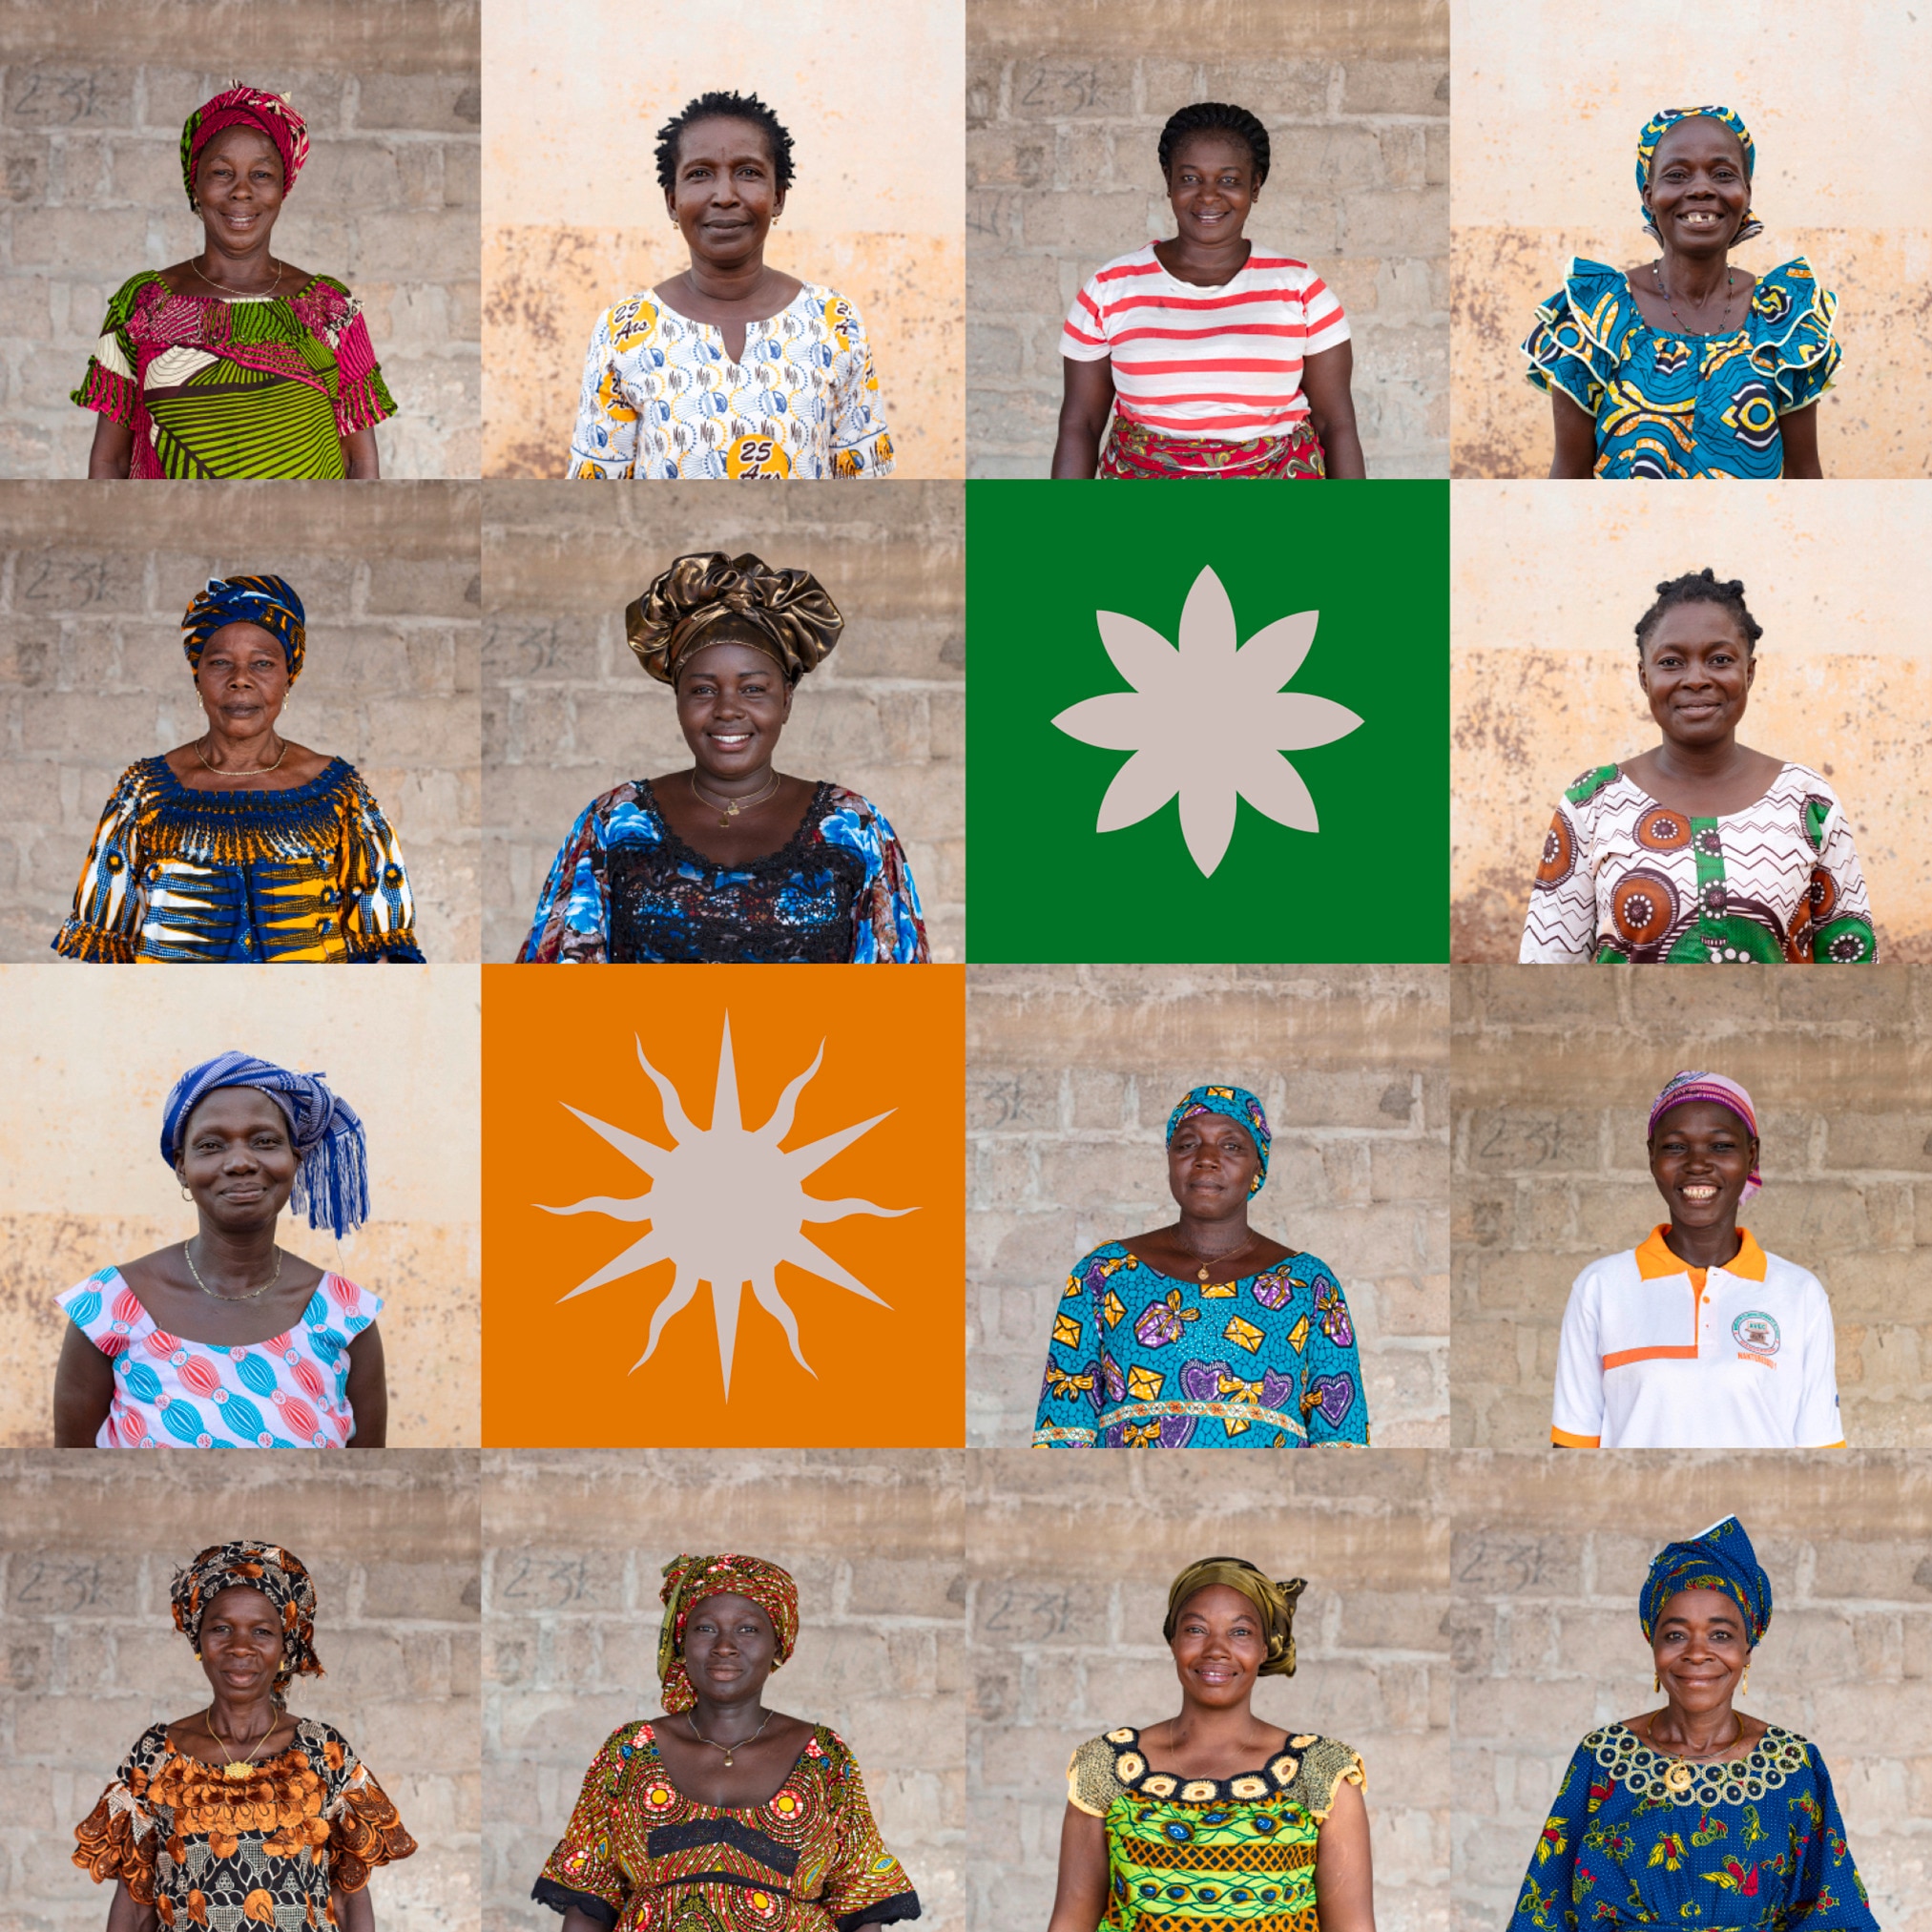 grid of 14 smiling african women portraits #9 - interspersed with a few colourful graphic square cut out illustrations